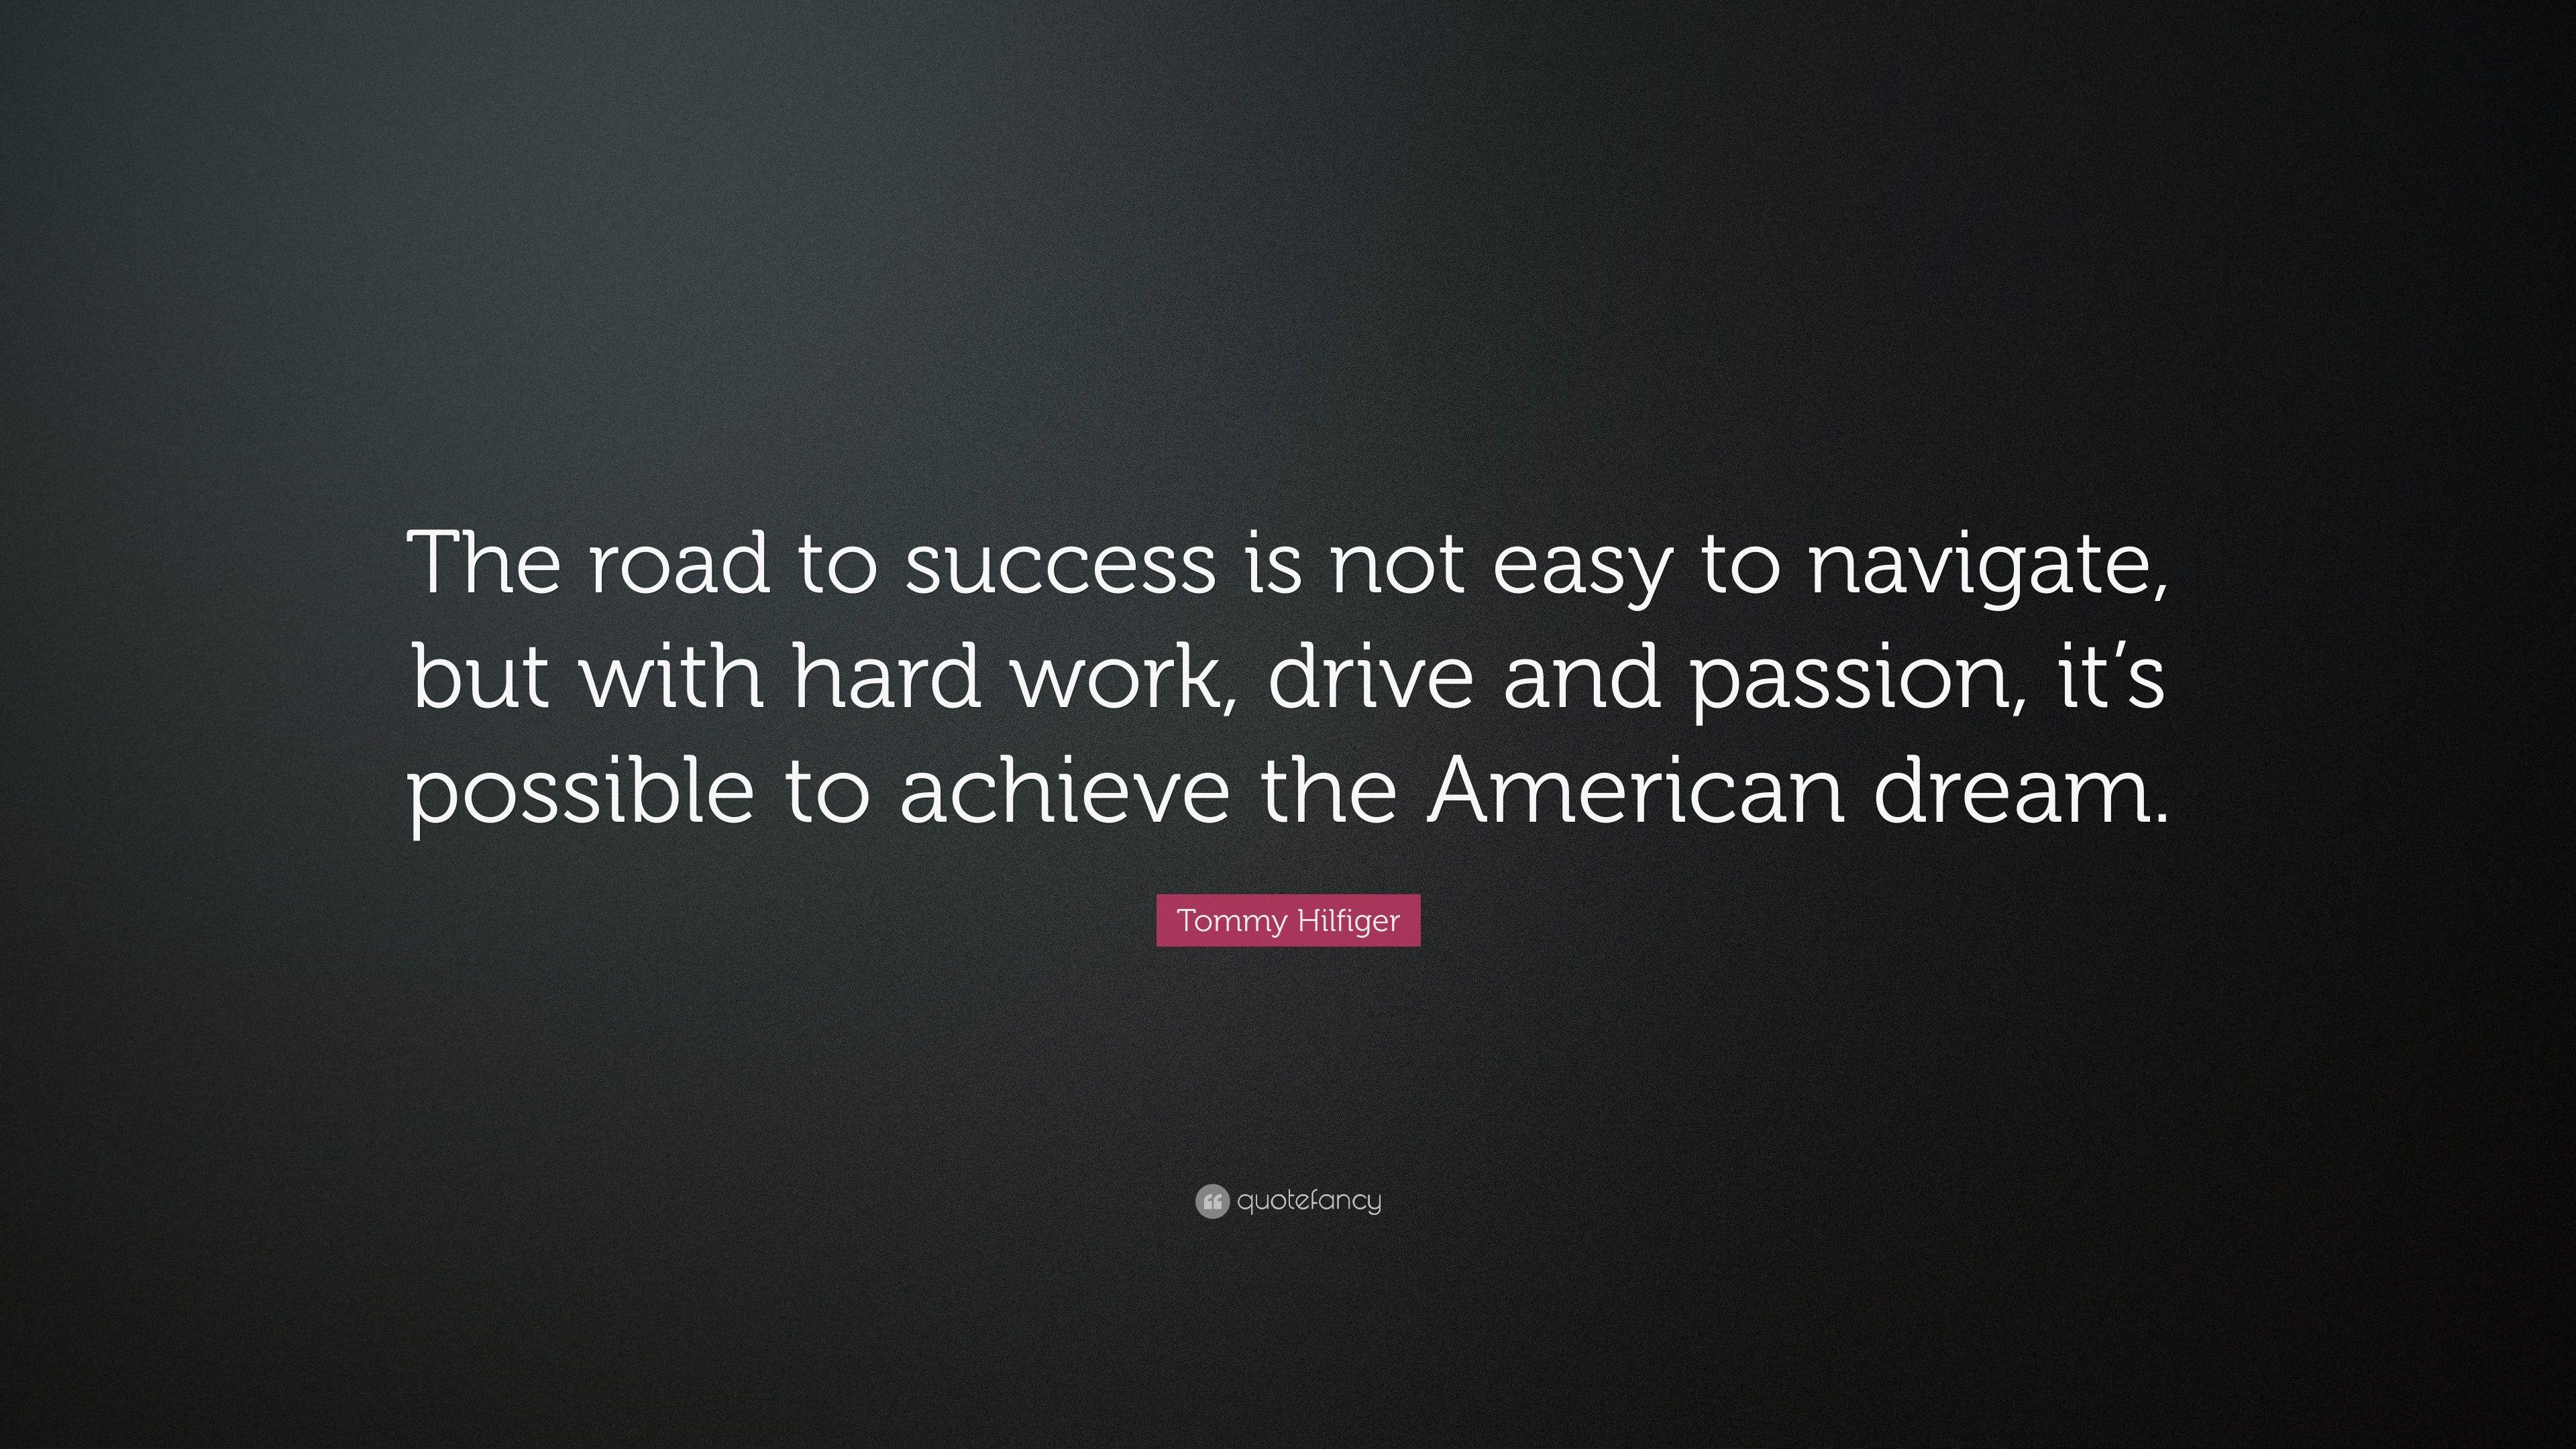 Tommy Hilfiger Quote: “The road to success is not easy to navigate